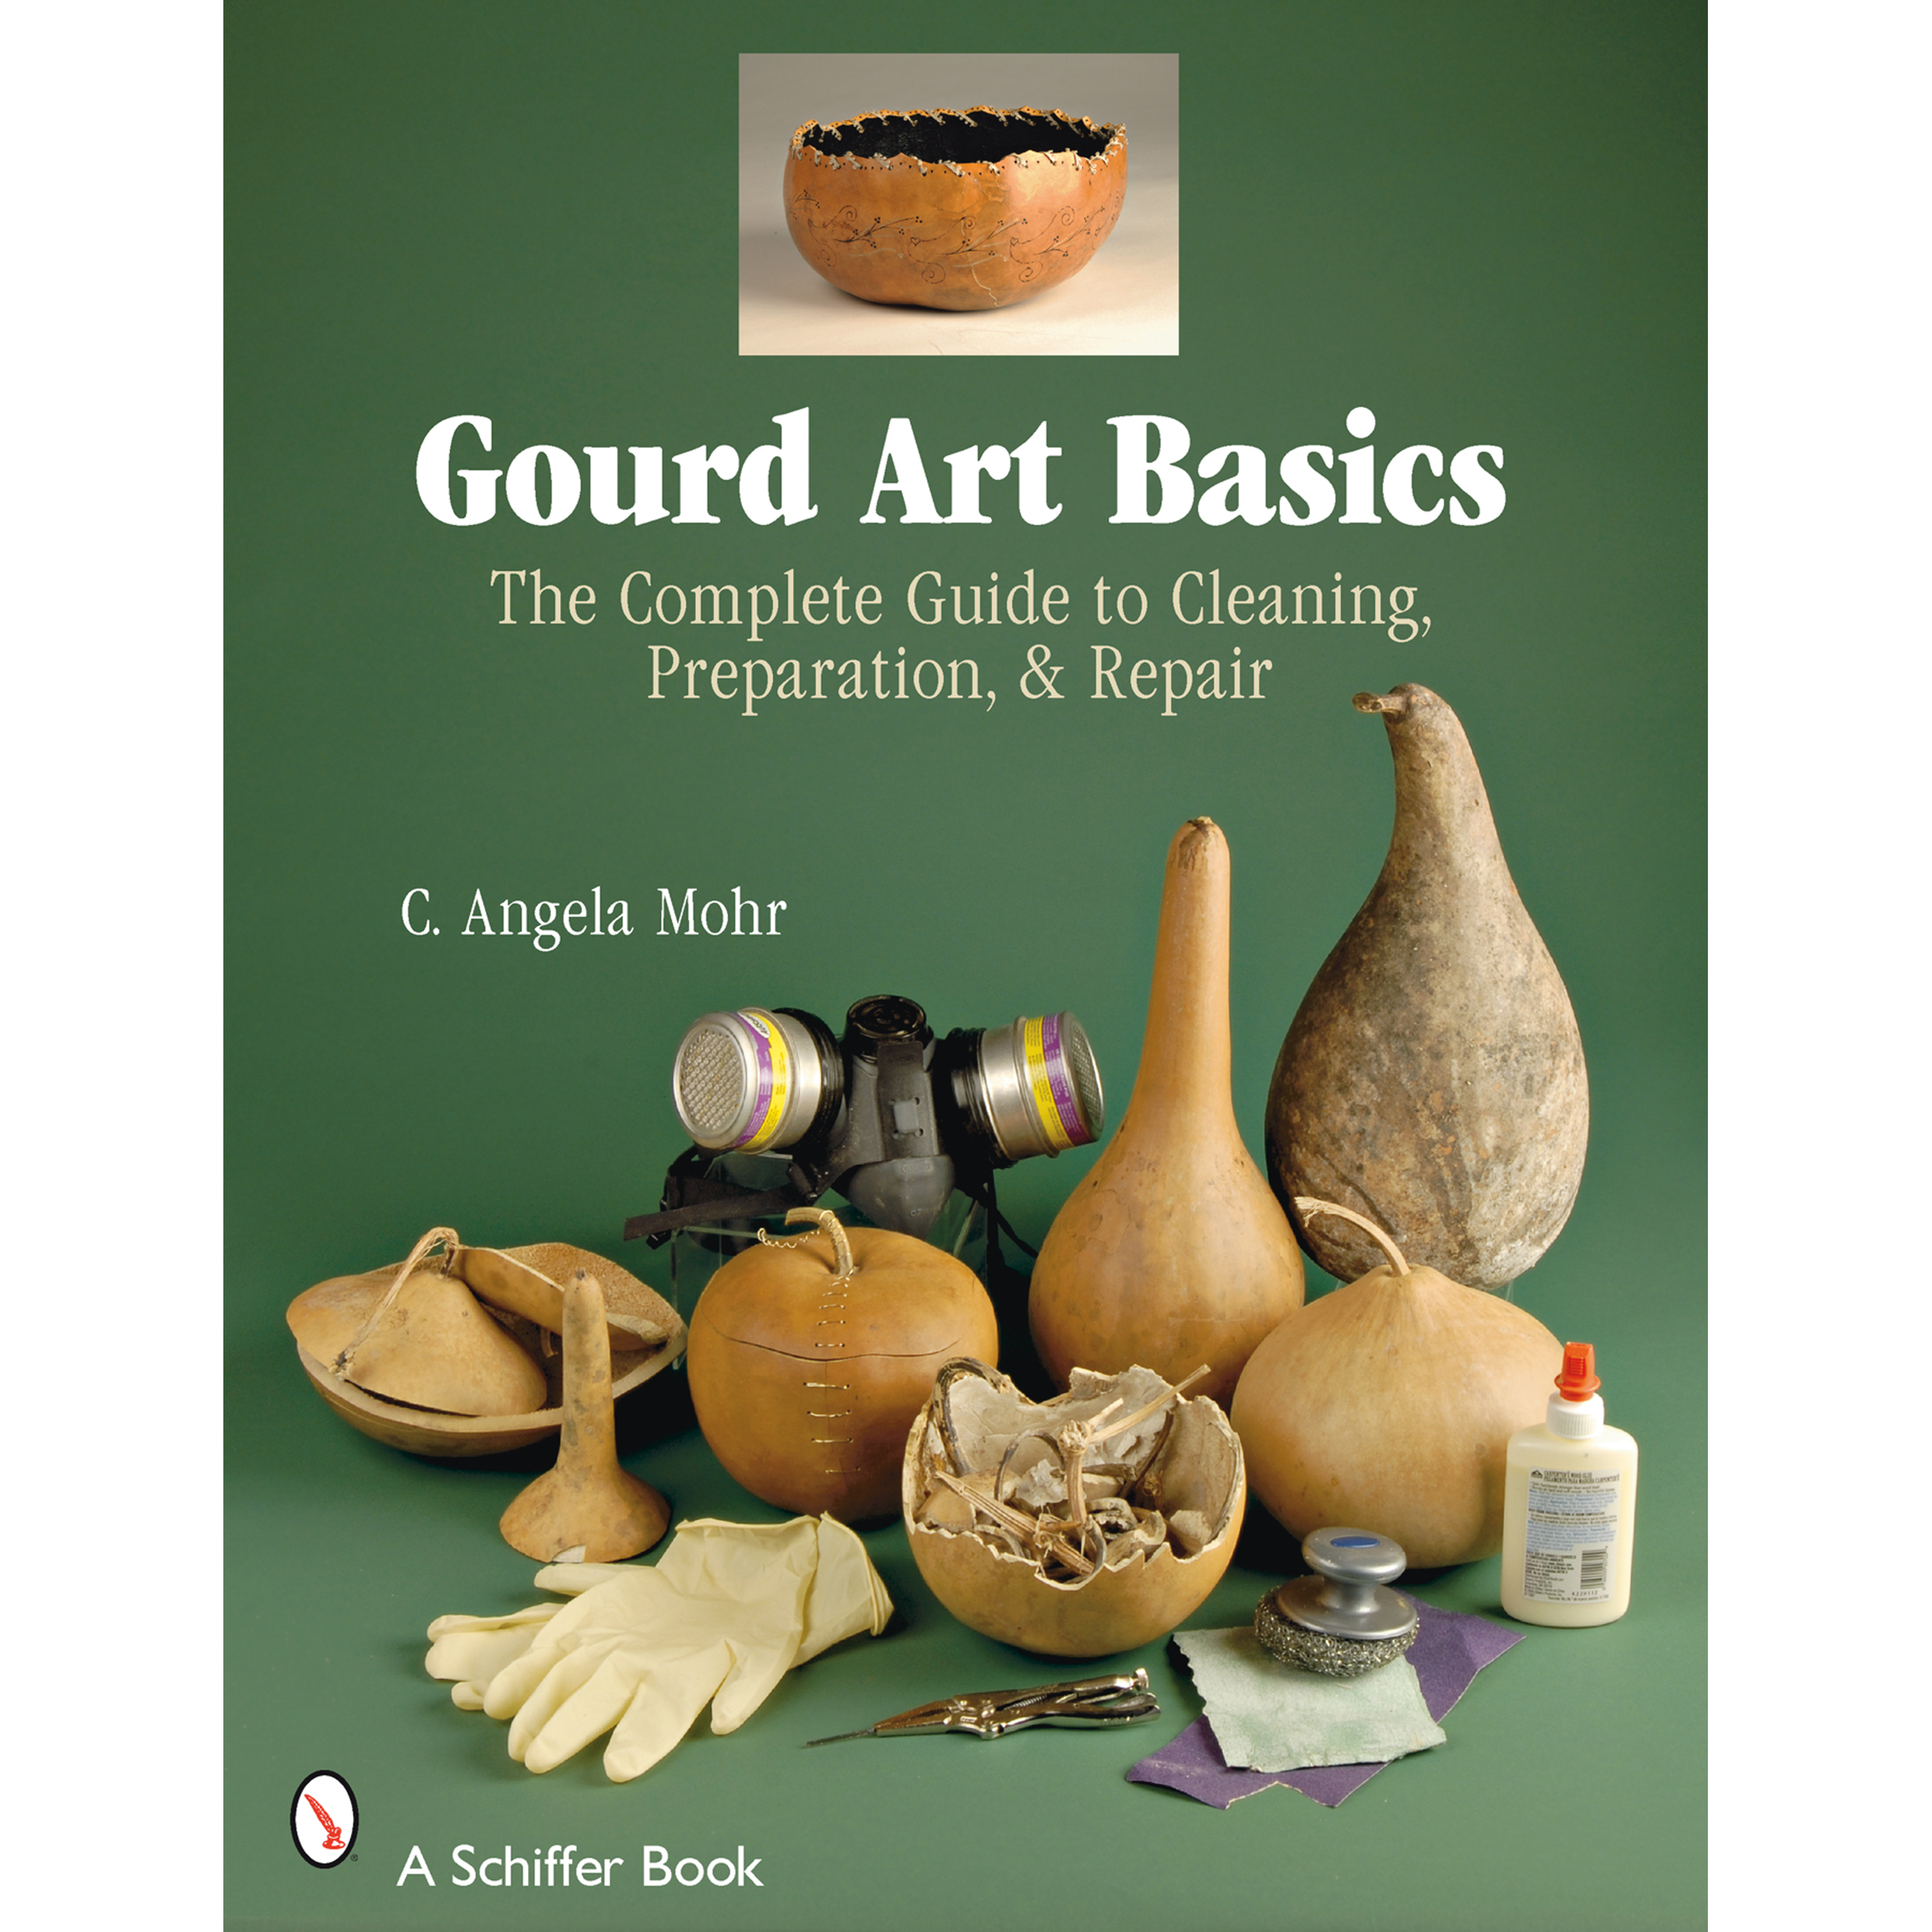 Gourd Art Basics: The Complete Guide To Cleaning, Preparation And Repair